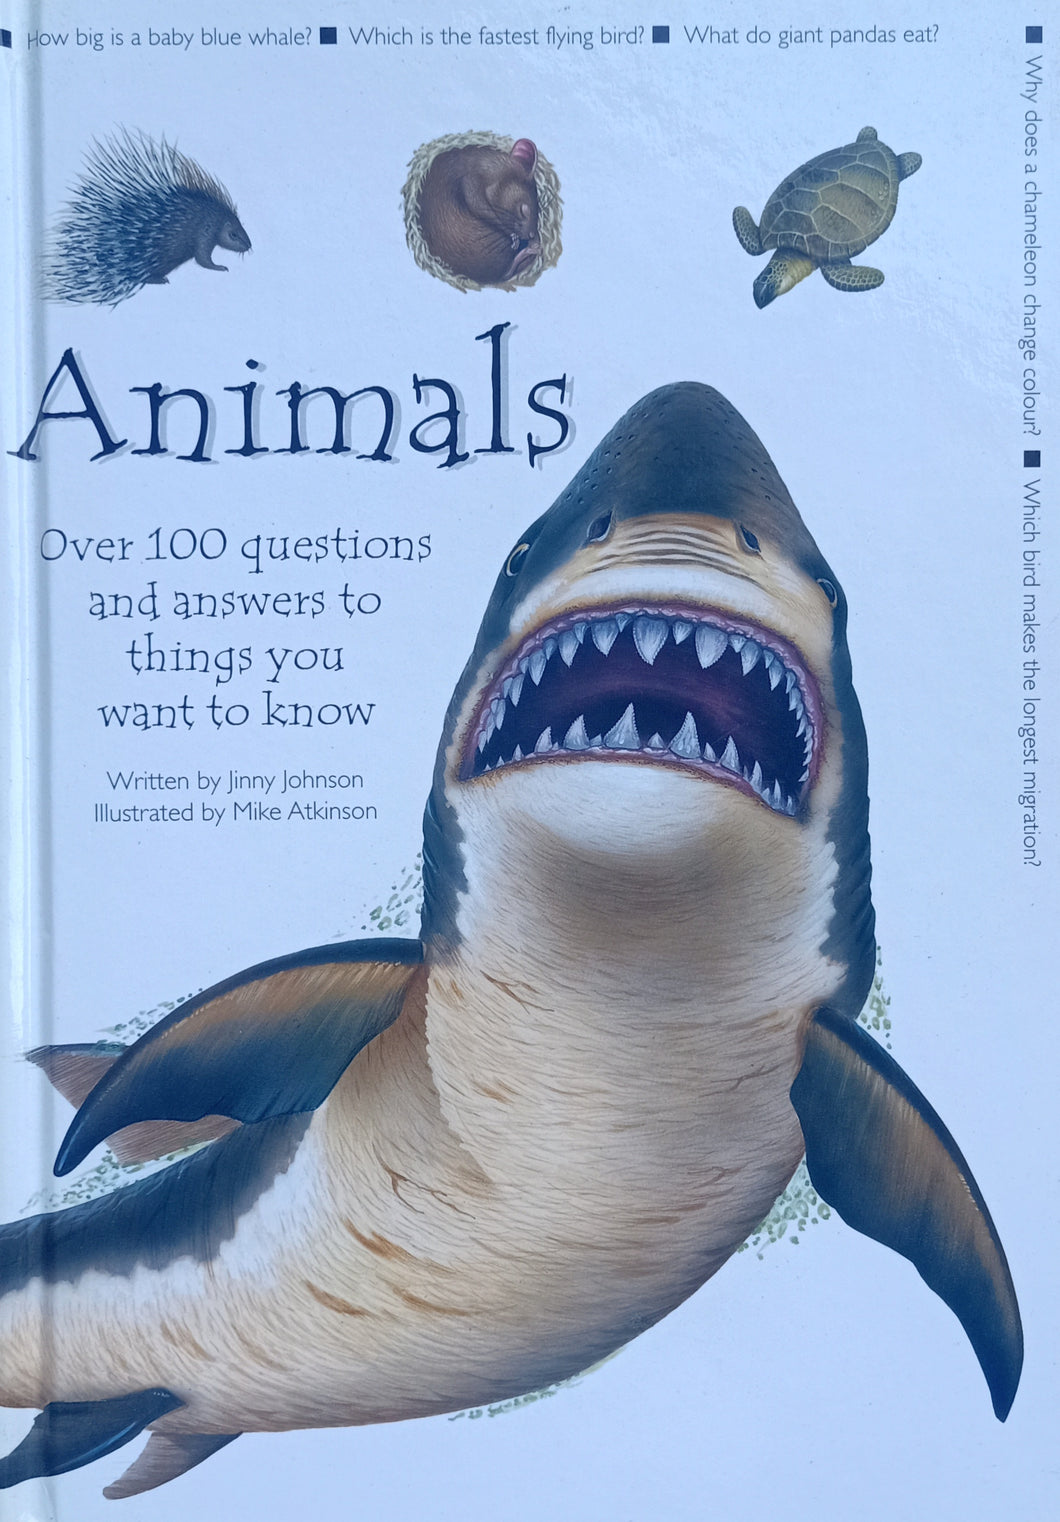 Animals Over 100 questions and Answers to Things You Want To Know